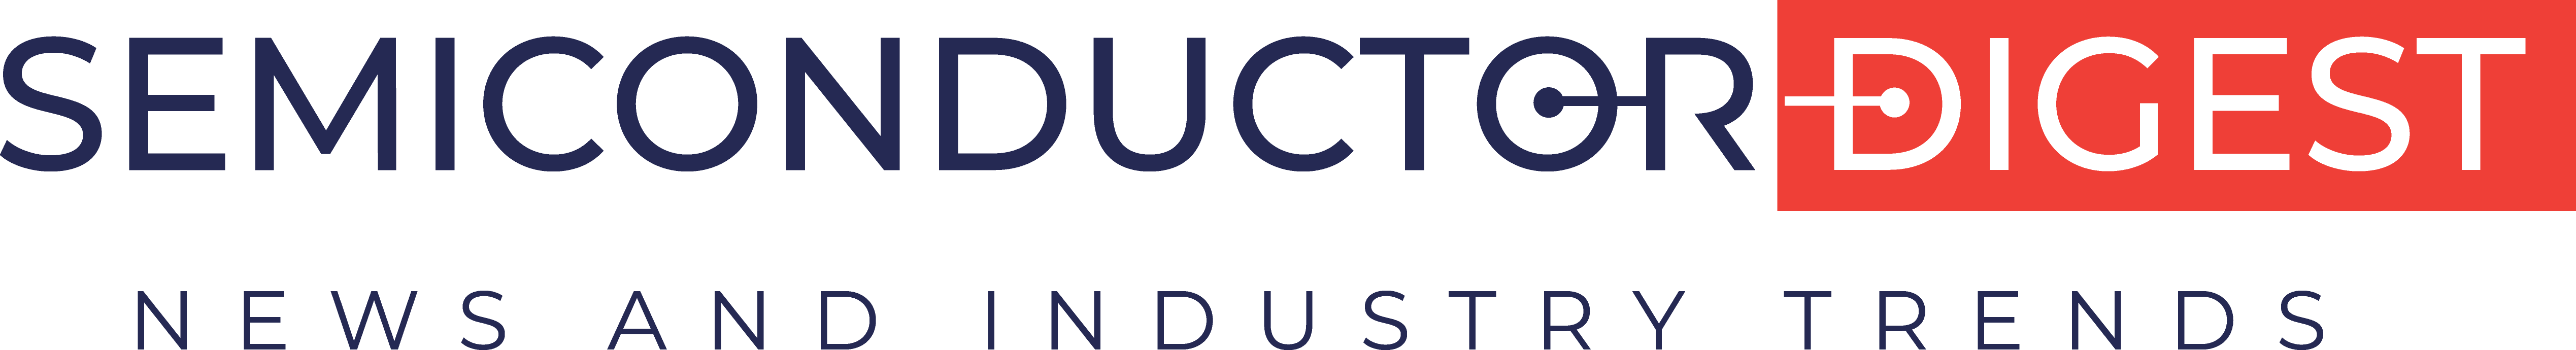 Semiconductor Digest logo. News and Industry Trends.